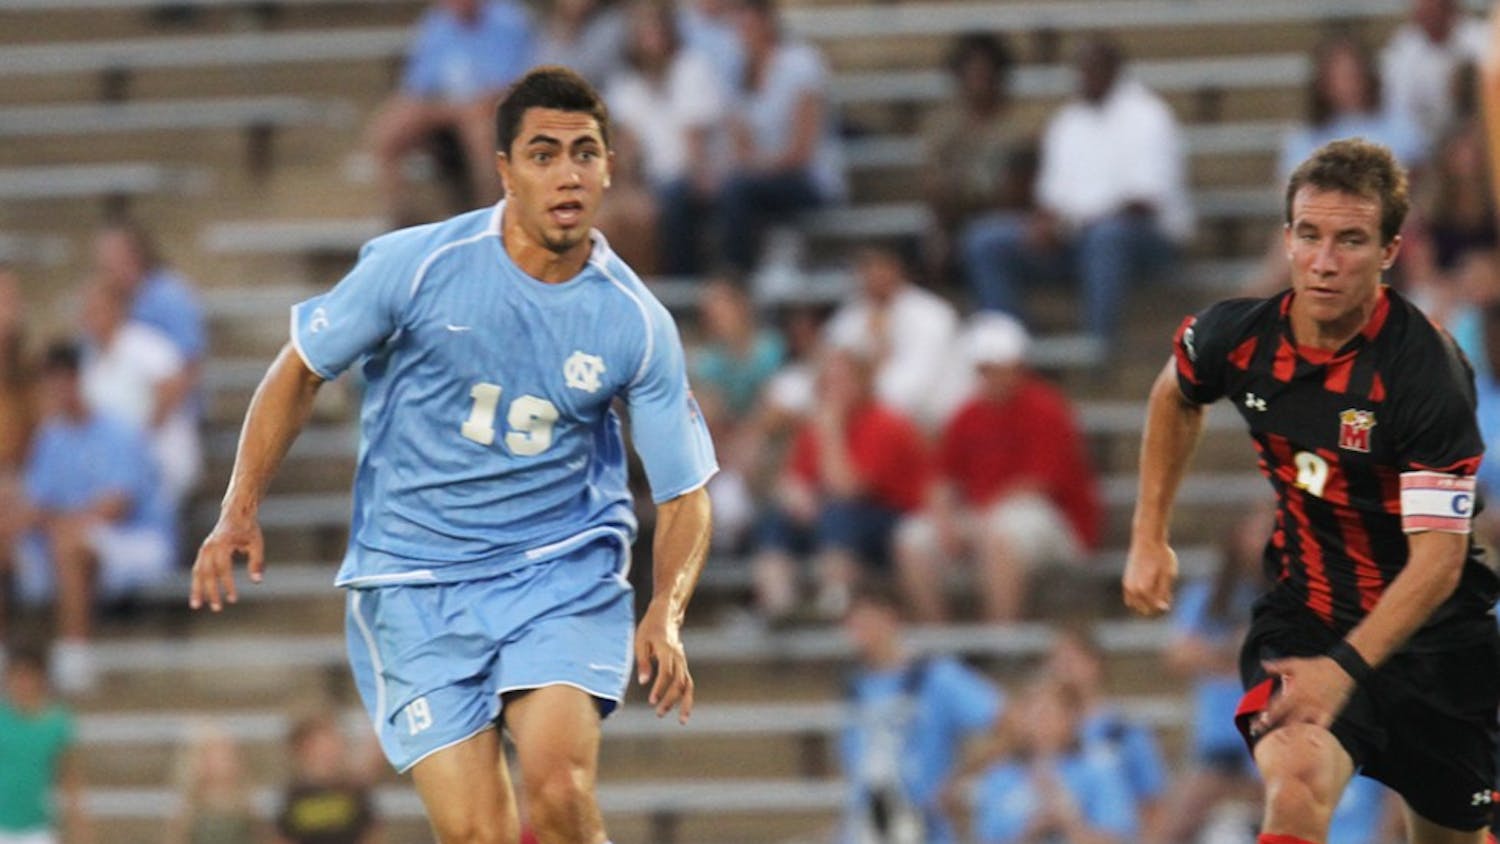 Midfielder Michael Farfan scored his first two goals of the season Friday night — one on a stunning 35-yard strike — to help UNC beat Maryland 2-1. With the victory, the Tar Heels moved to 3-0 in conference play.